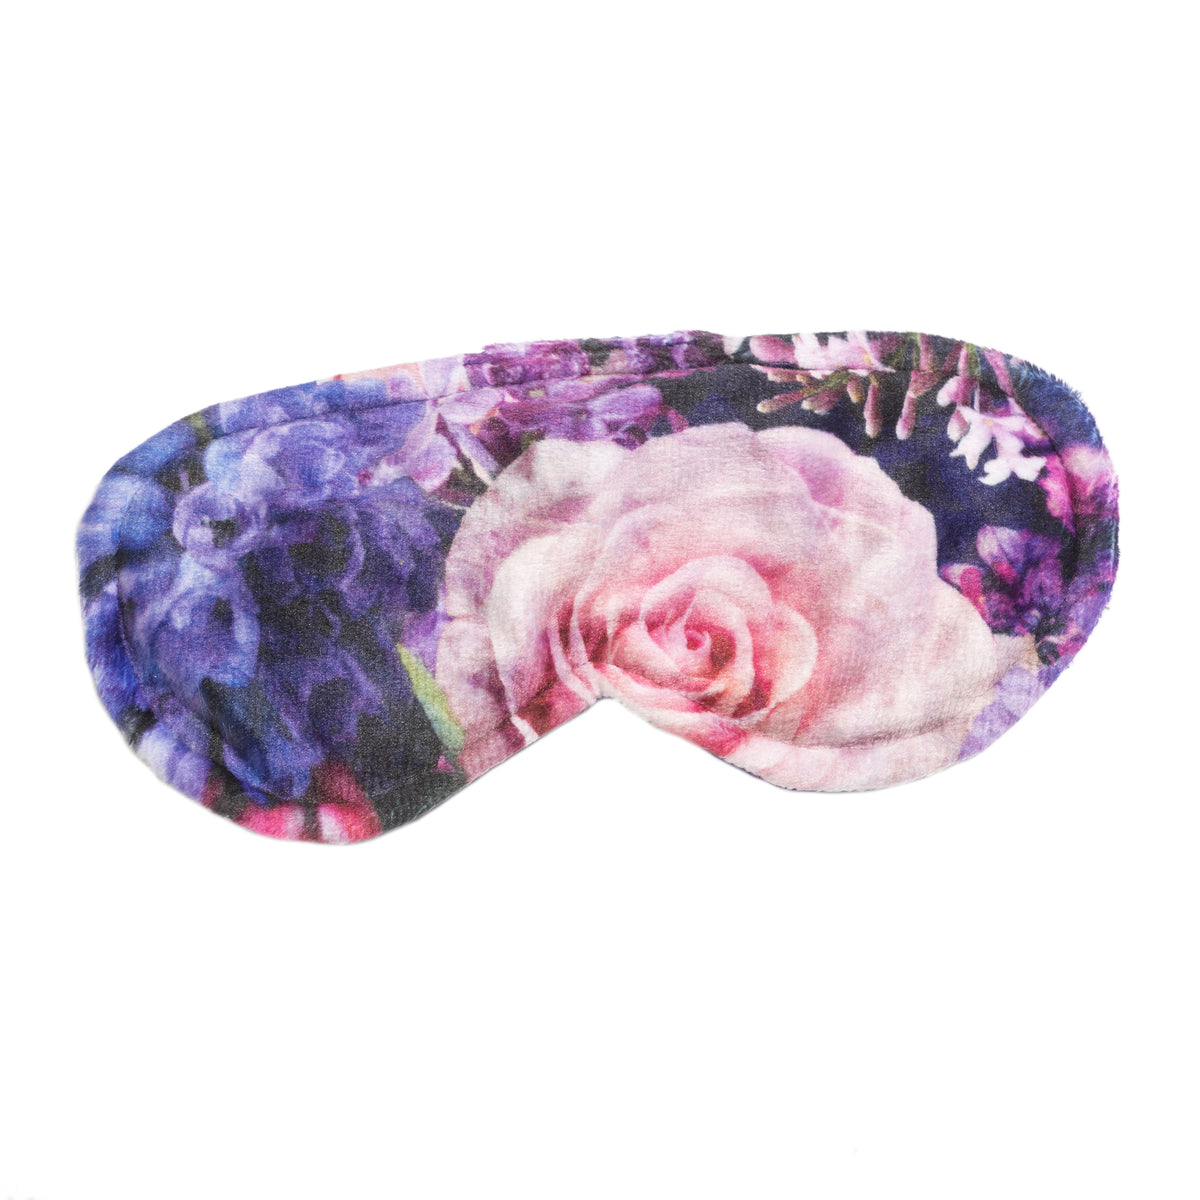 A Sonoma Lavender Sleep Mask - Peony Bouquet handmade in Sonoma County, featuring a prominent pink rose among shades of purple and teal flowers, isolated on a white background.